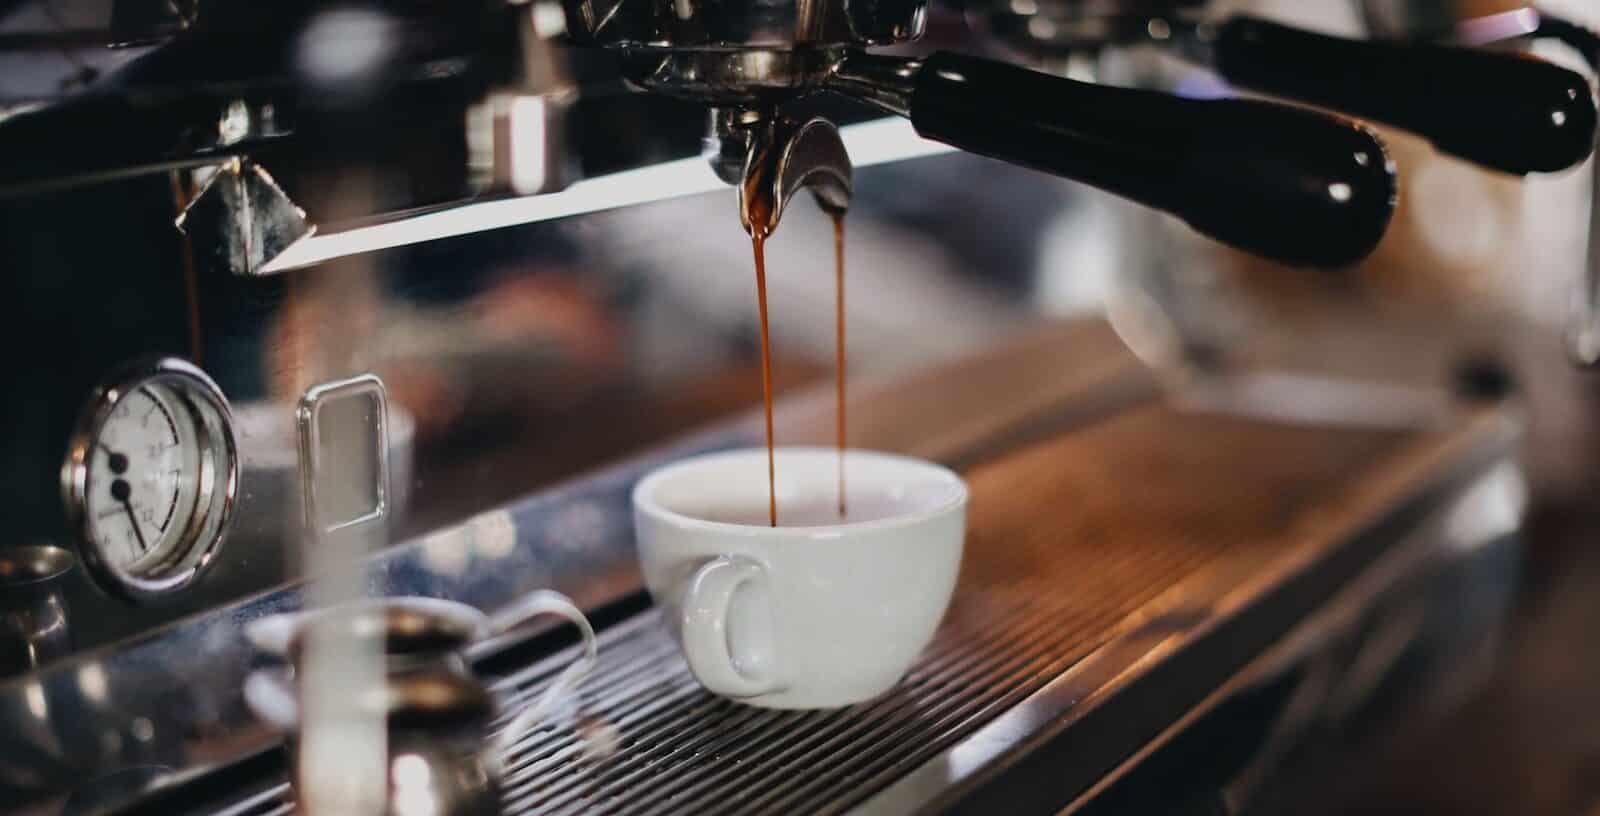 Fresh single espresso shot being brewed at a coffee shop in Italy